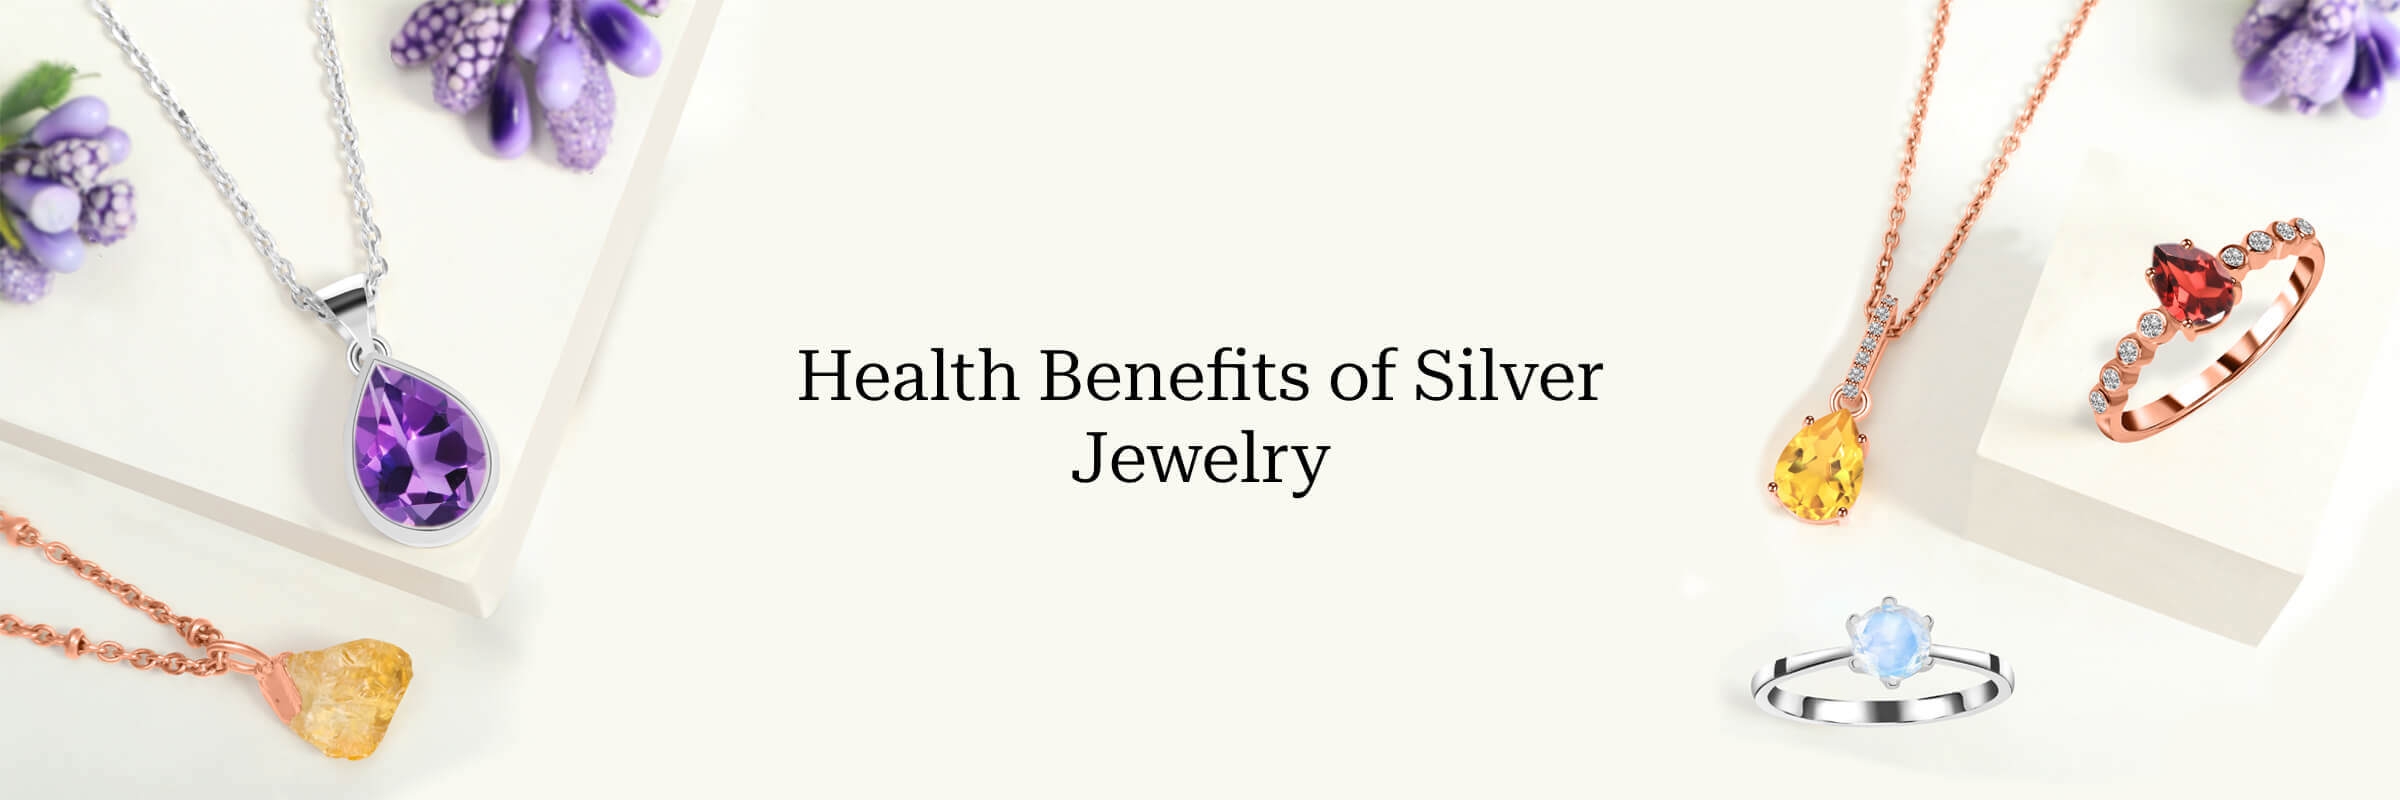 Is there any benefit of wearing silver ring? | Silveradda